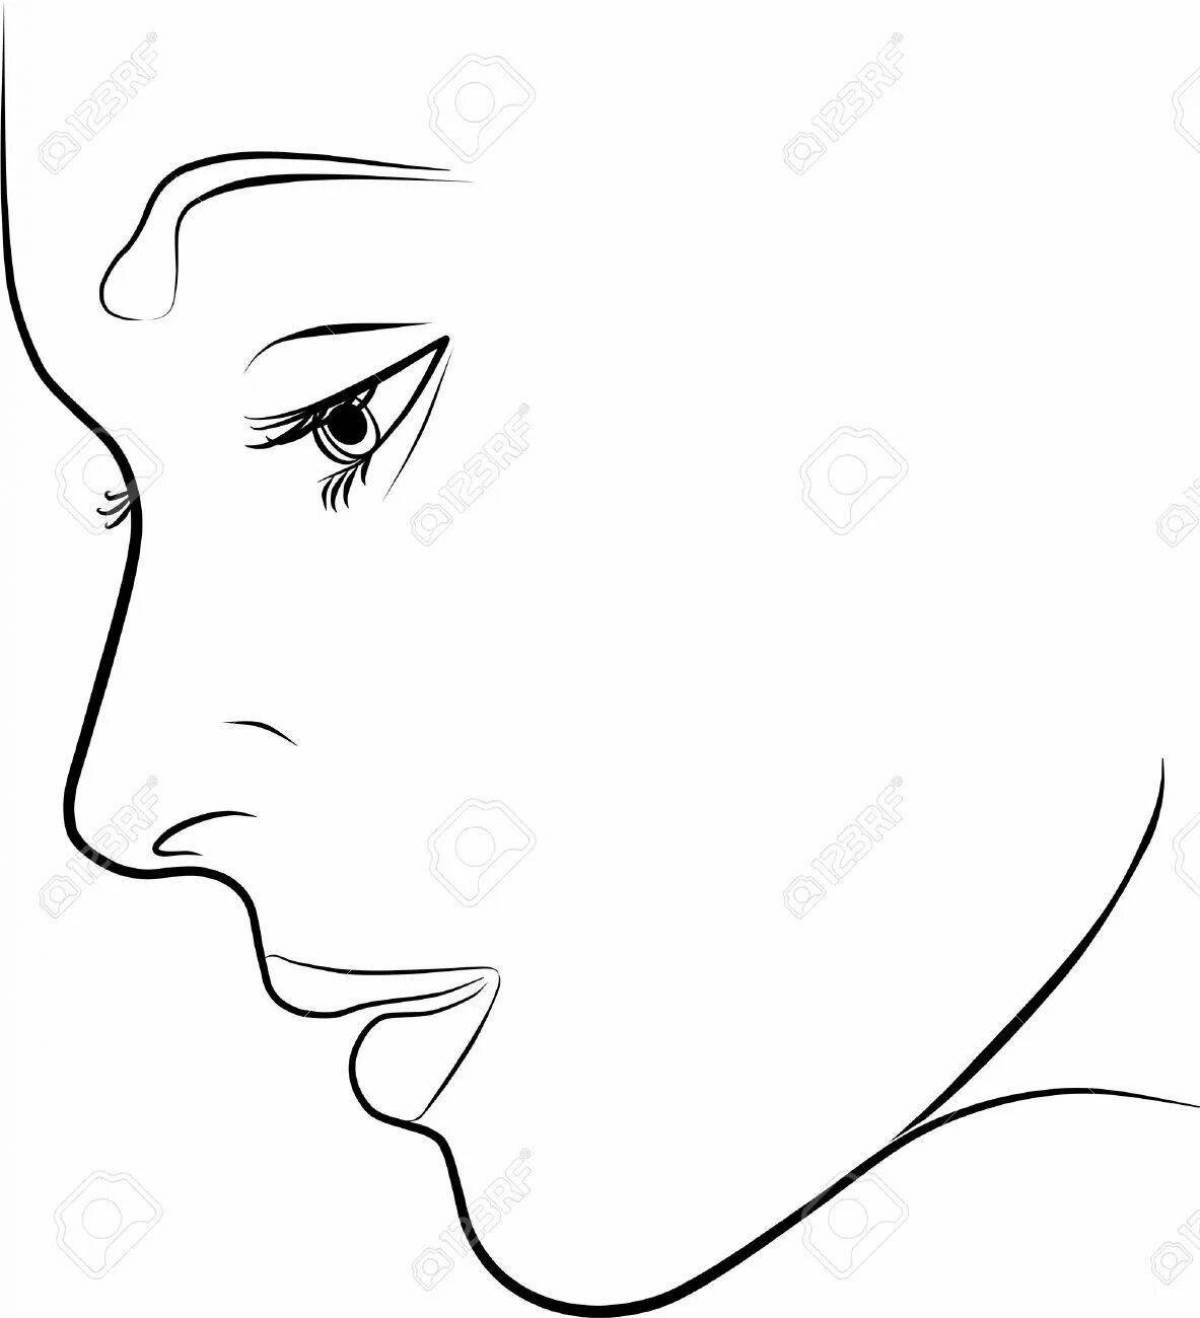 Coloring page of funny face profile